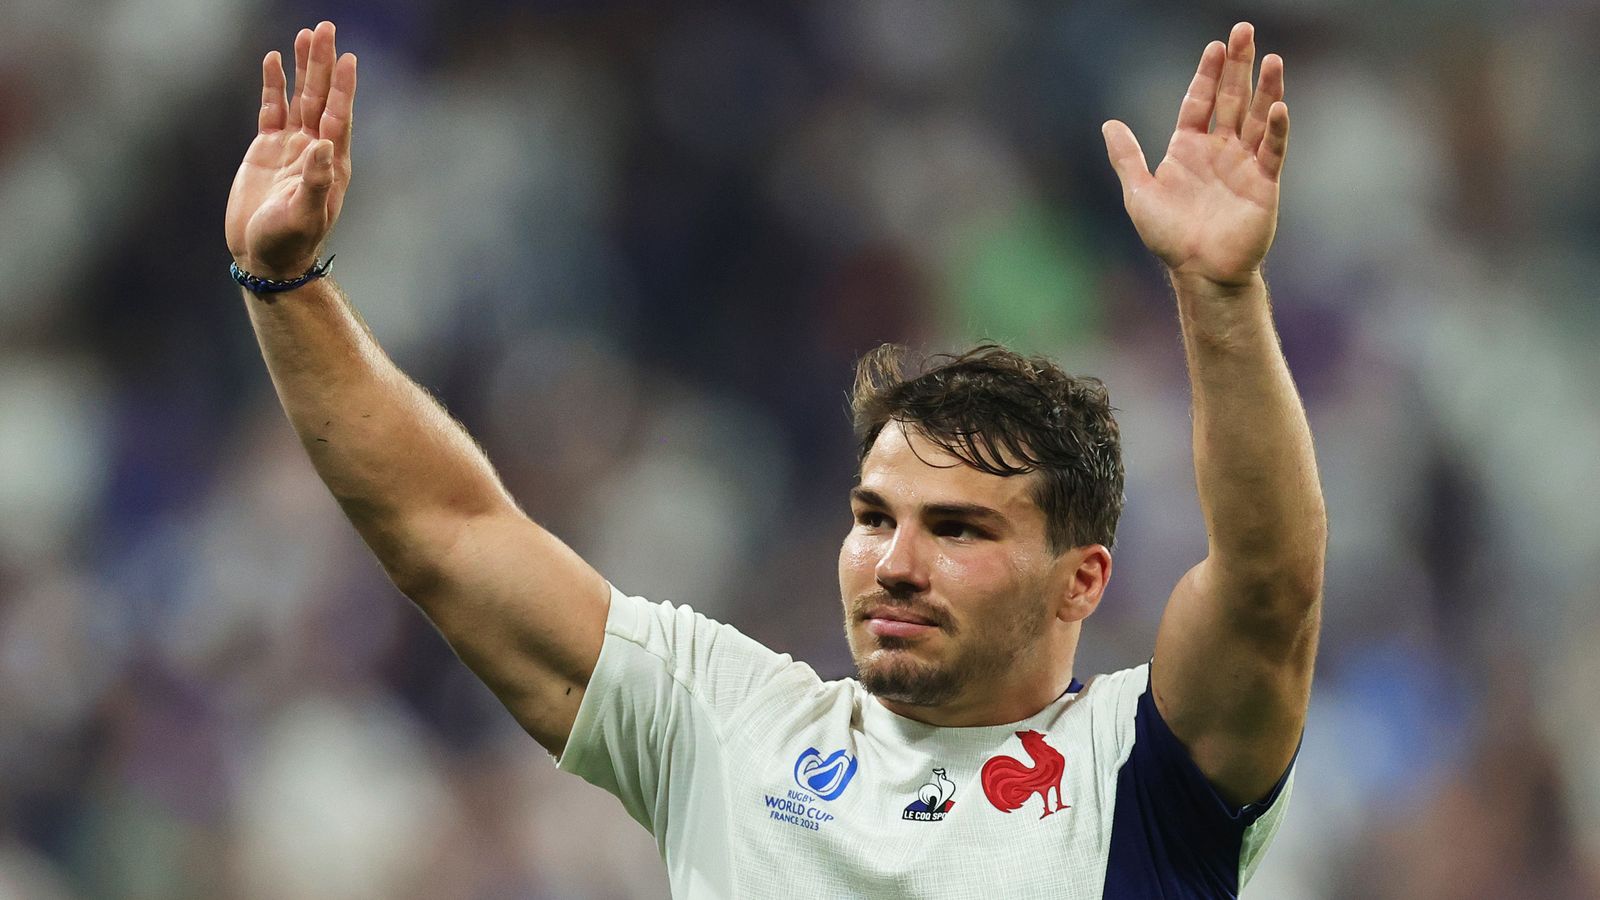 Rugby World Cup: Antoine Dupont named to start for France vs South Africa in quarter-final | Rugby Union News